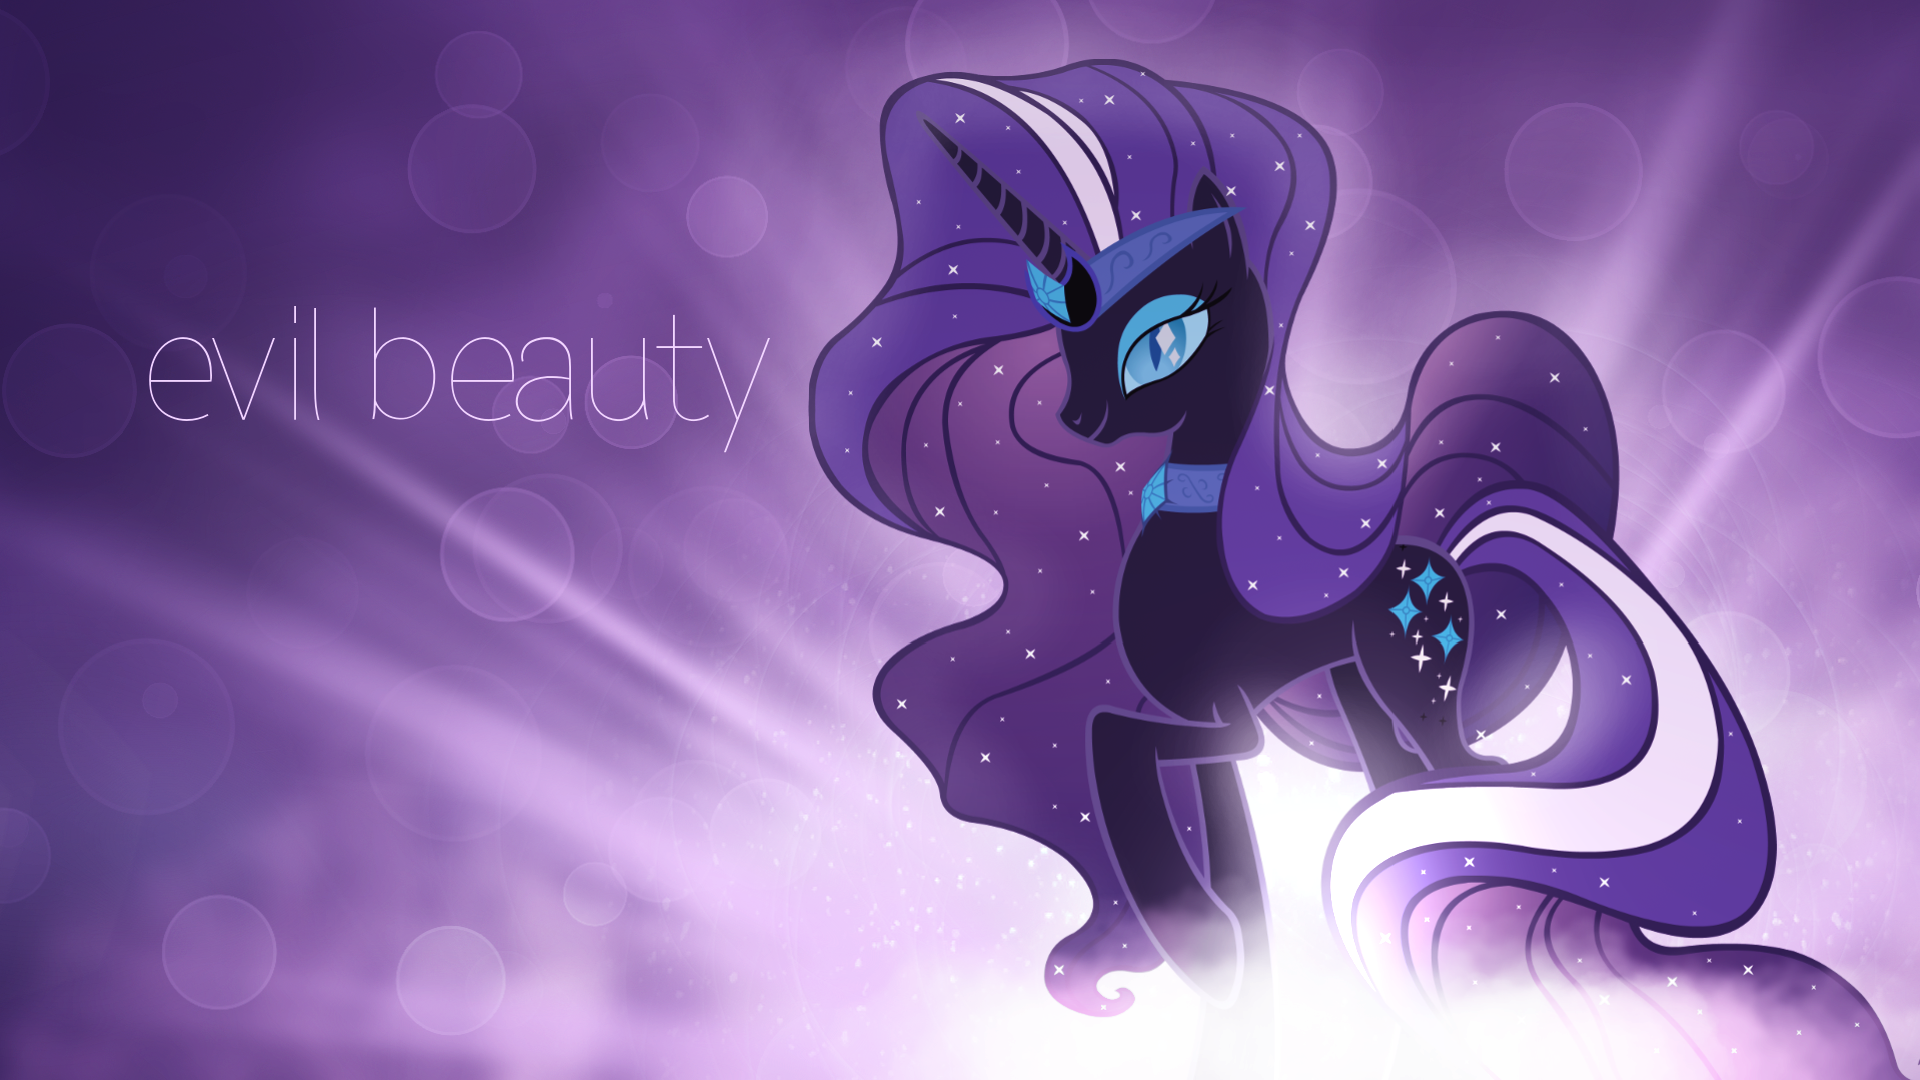 Evil Beauty by DaChickenDog and Doctor-G